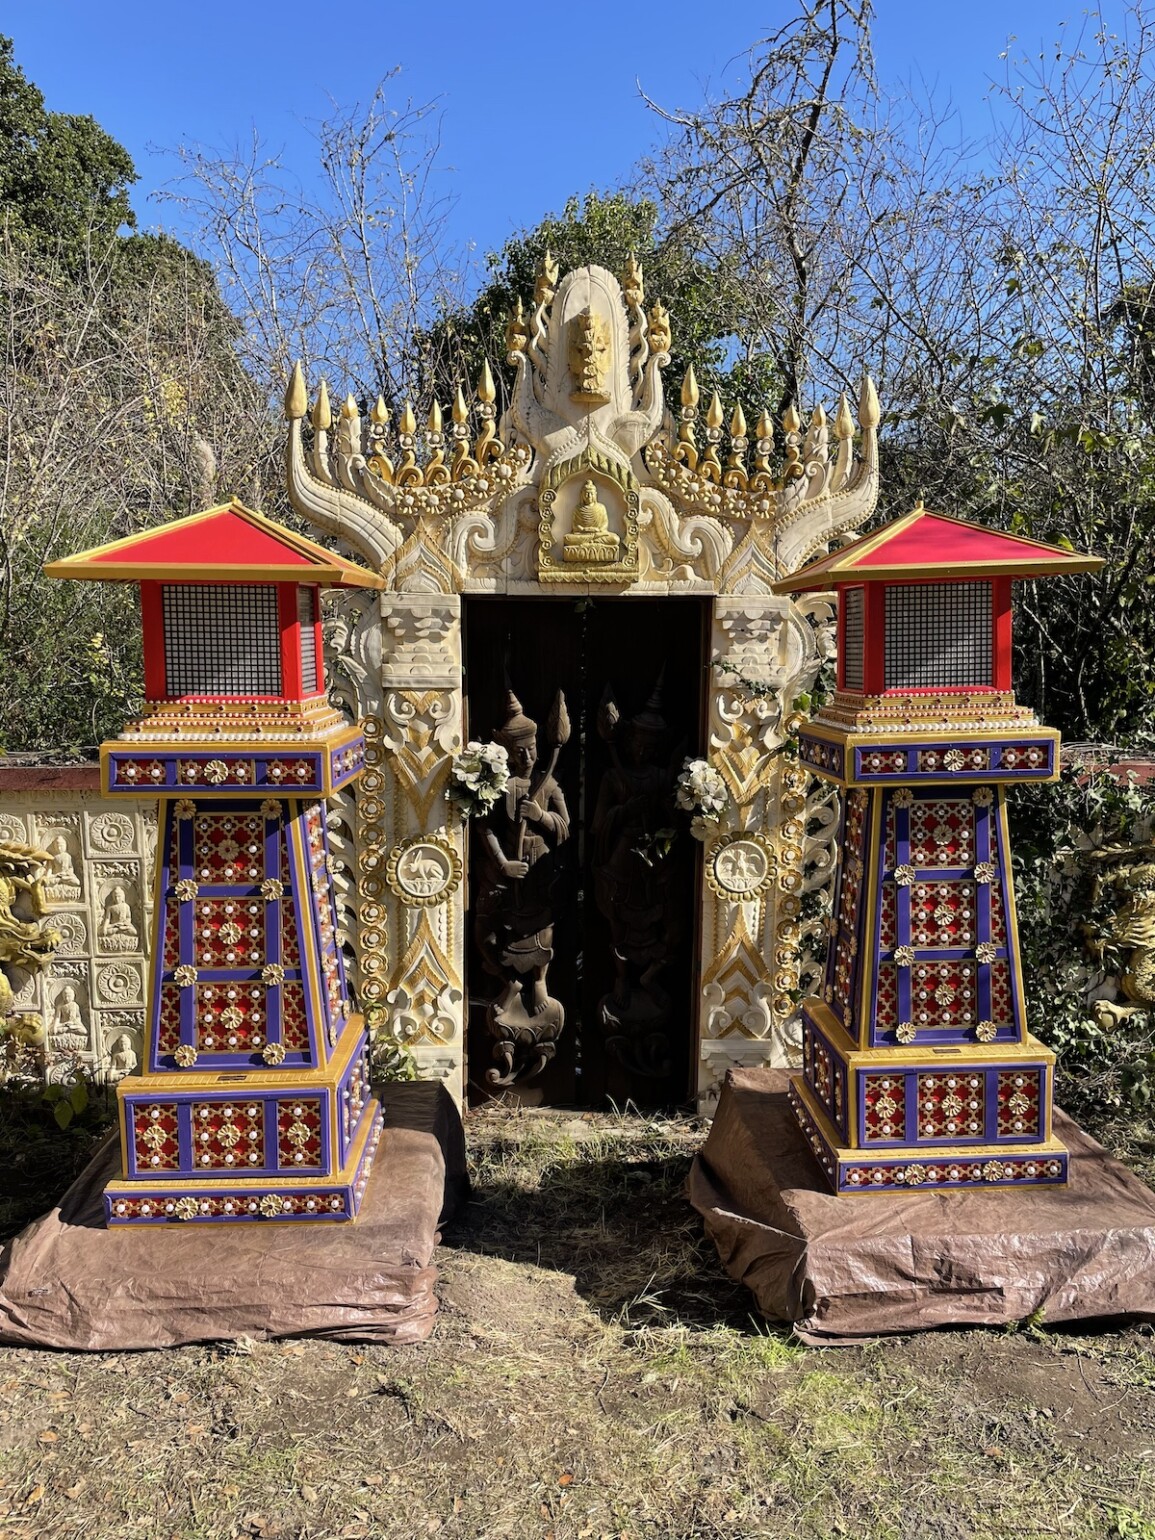 Jaap van Leeuwen's lanterns in front of the concrete Myanmar Buddhist monastery gateway that he made in Bolinas